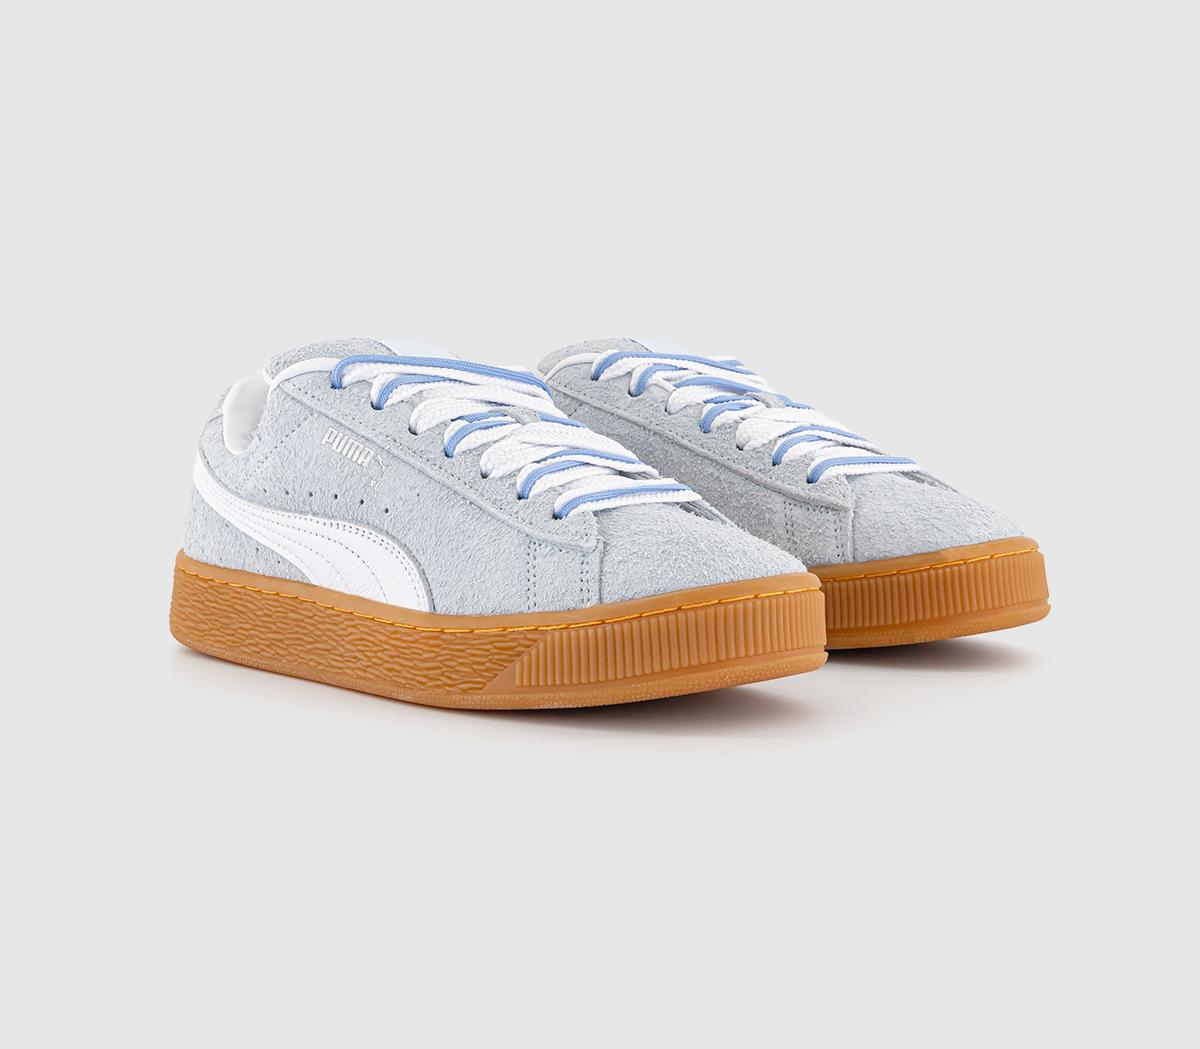 Puma Womens Suede Xl Trainers Icy Blue White Silver, 5